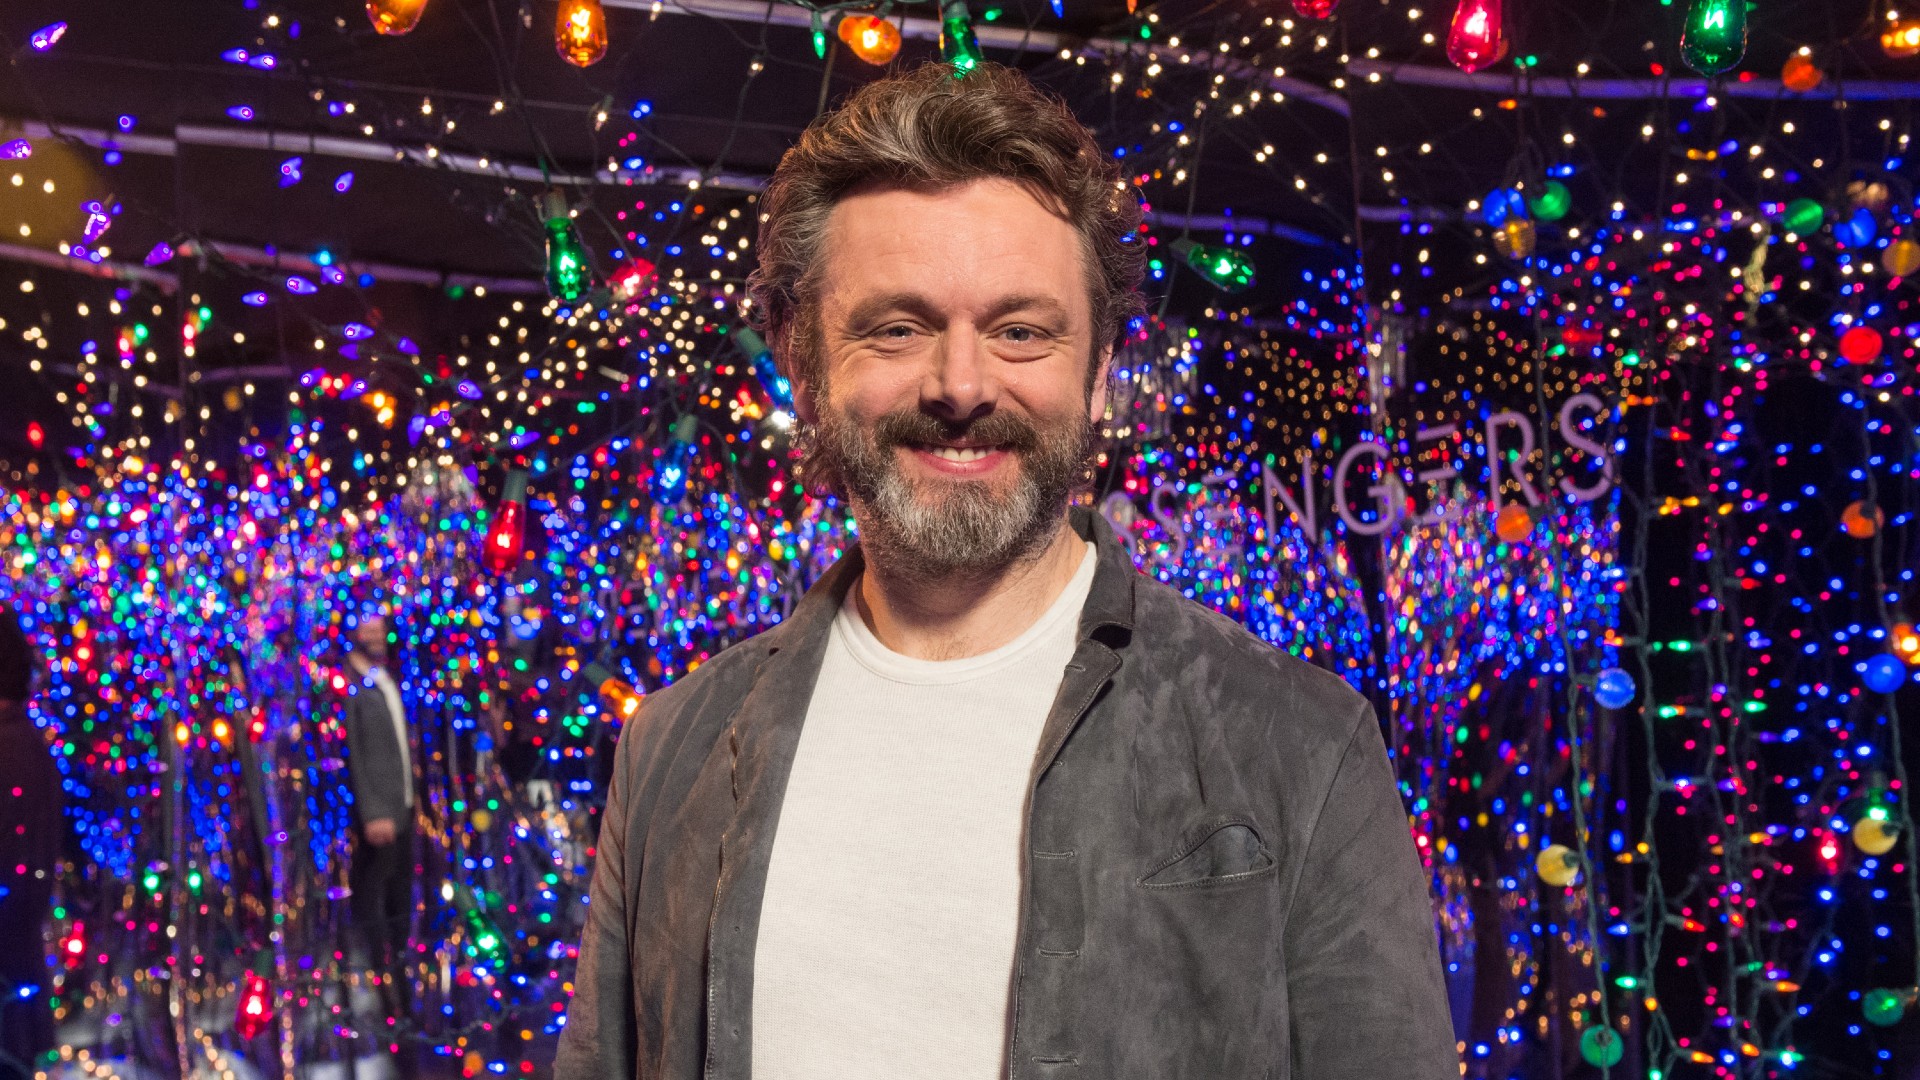 Michael Sheen Says He Is Now a ‘Not-for-Profit Actor’